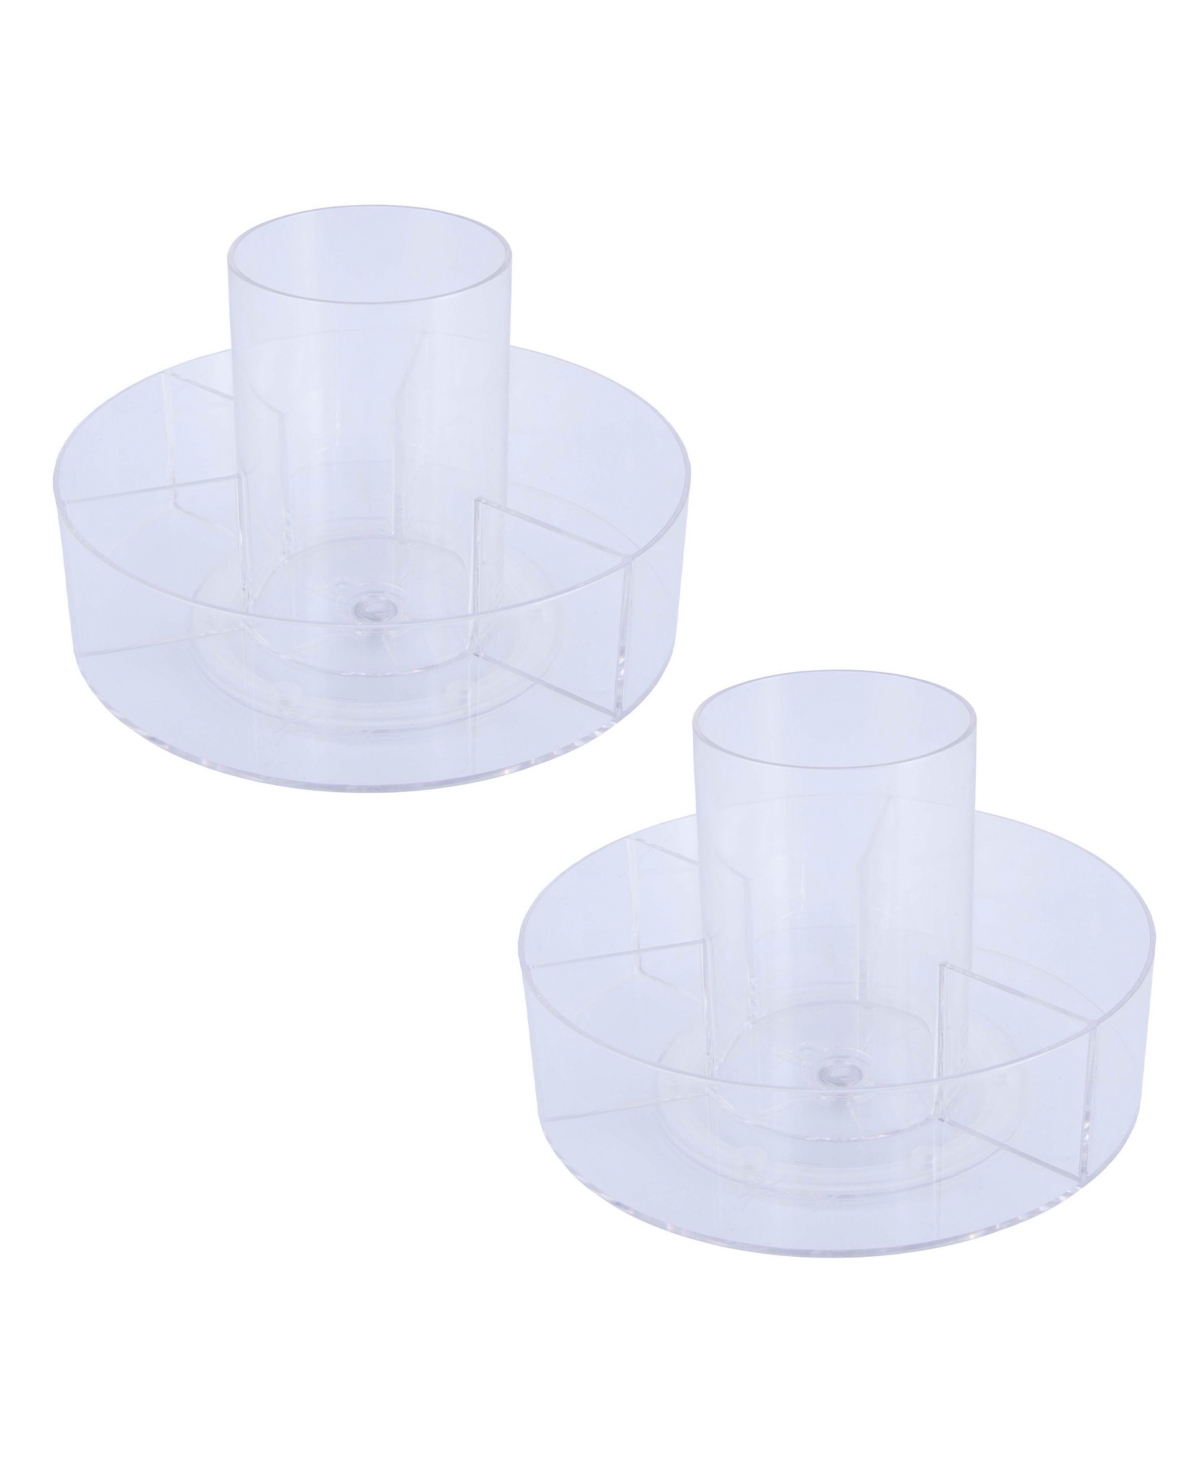 Lazy Susan Rotating Countertop Organizer, 5 Compartment, Set of 2 - Clear